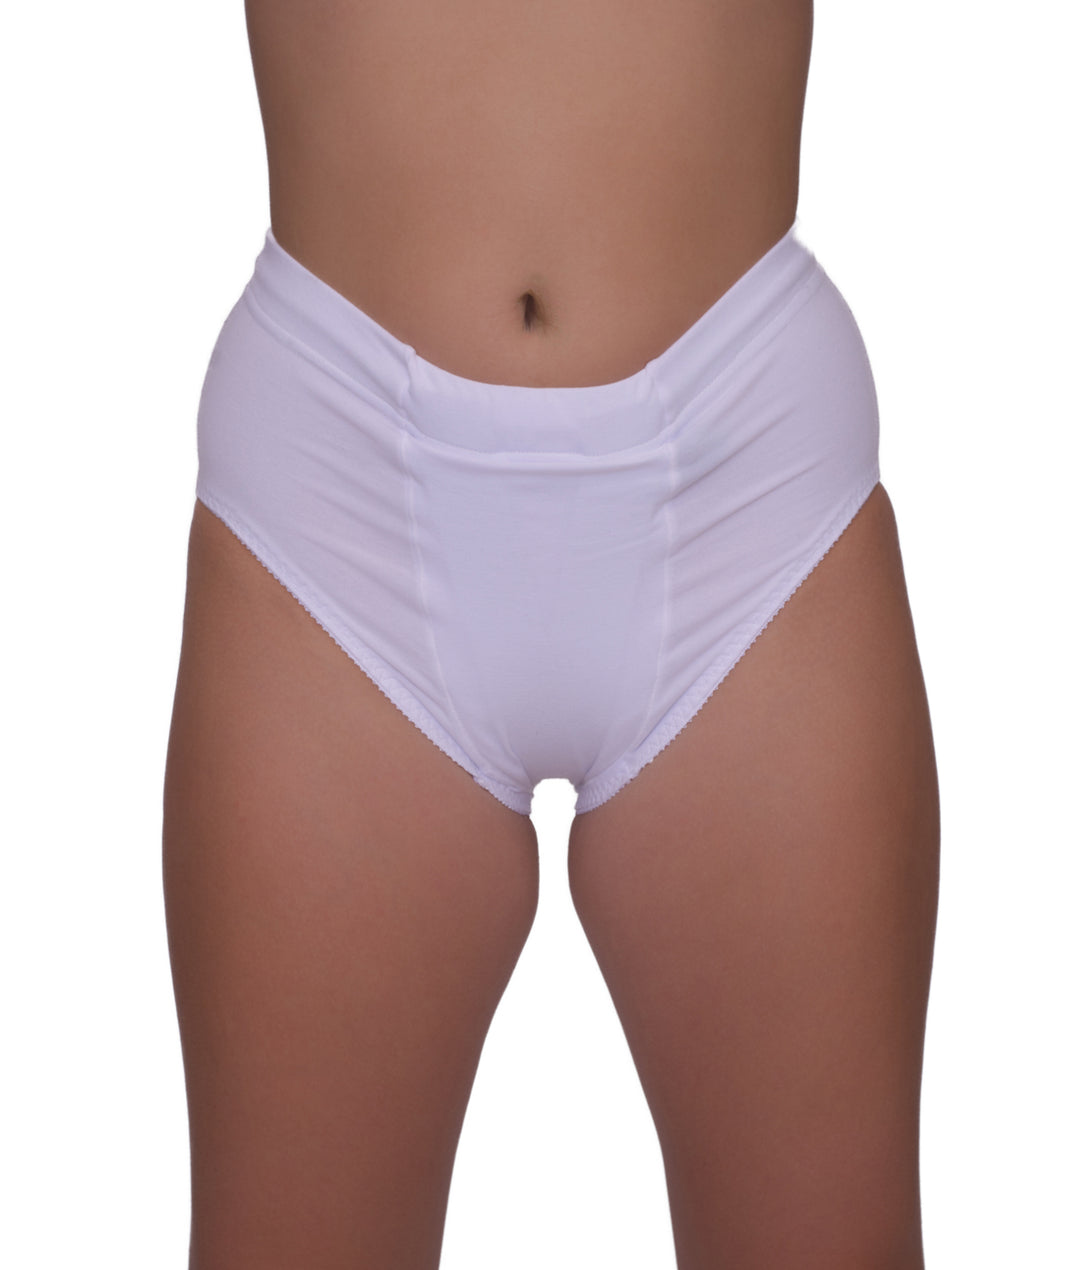 Hernia Support Vulvar Varicosity and Prolapse Support Brief with Groin Compression Bands